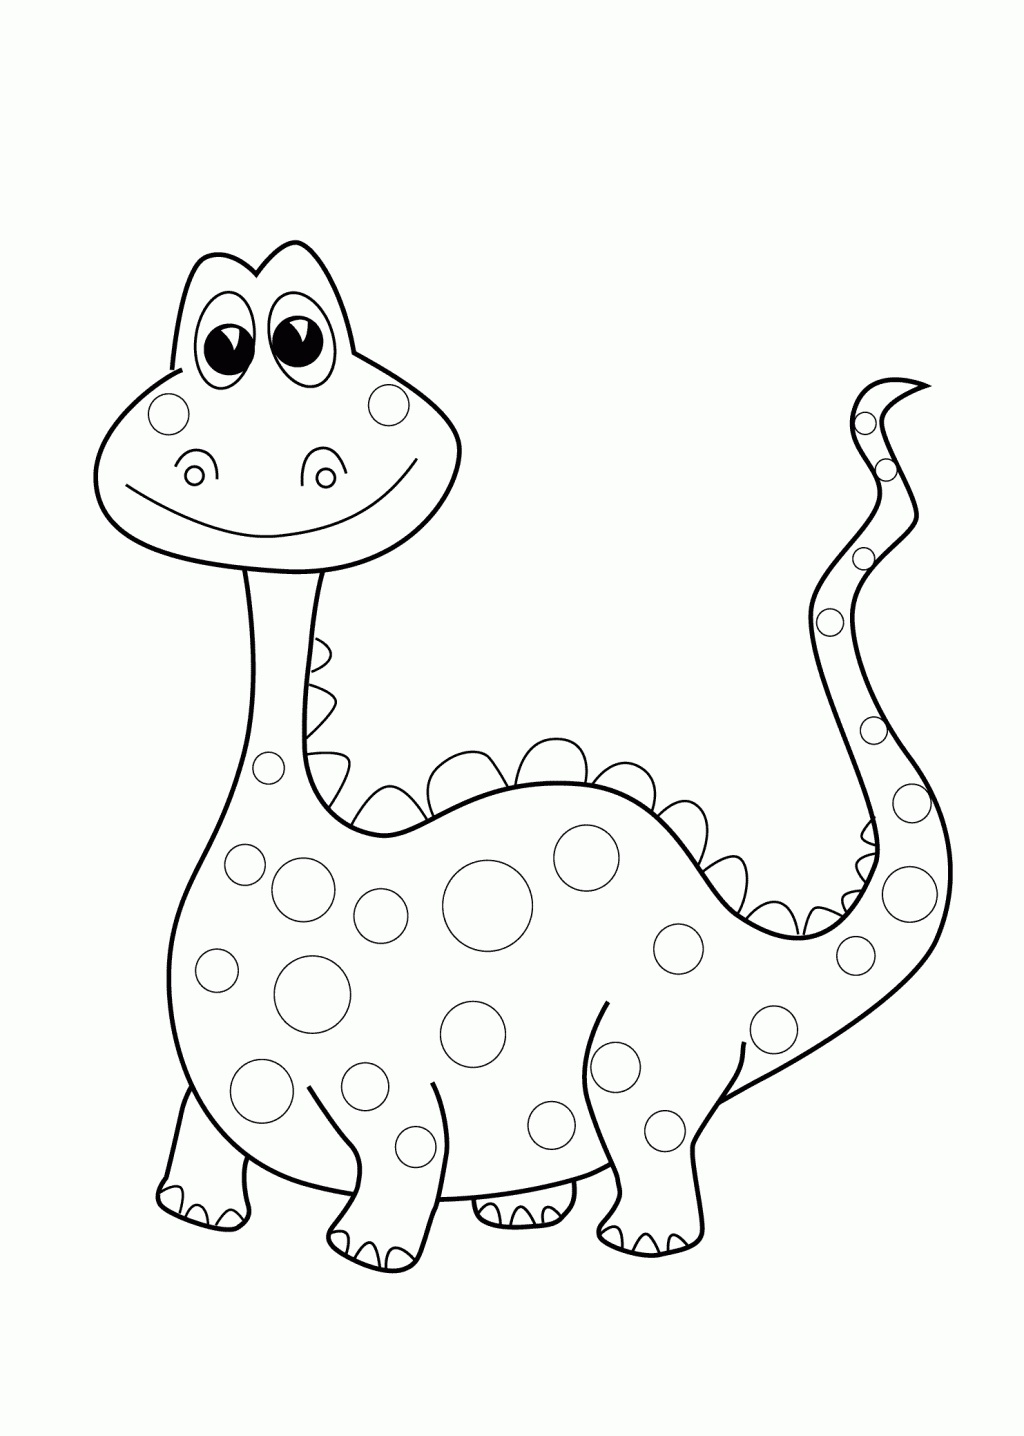 Coloring Page ~ Splendi Free Coloring Sheets For Kids Printable - Free Printable Pages For Preschoolers